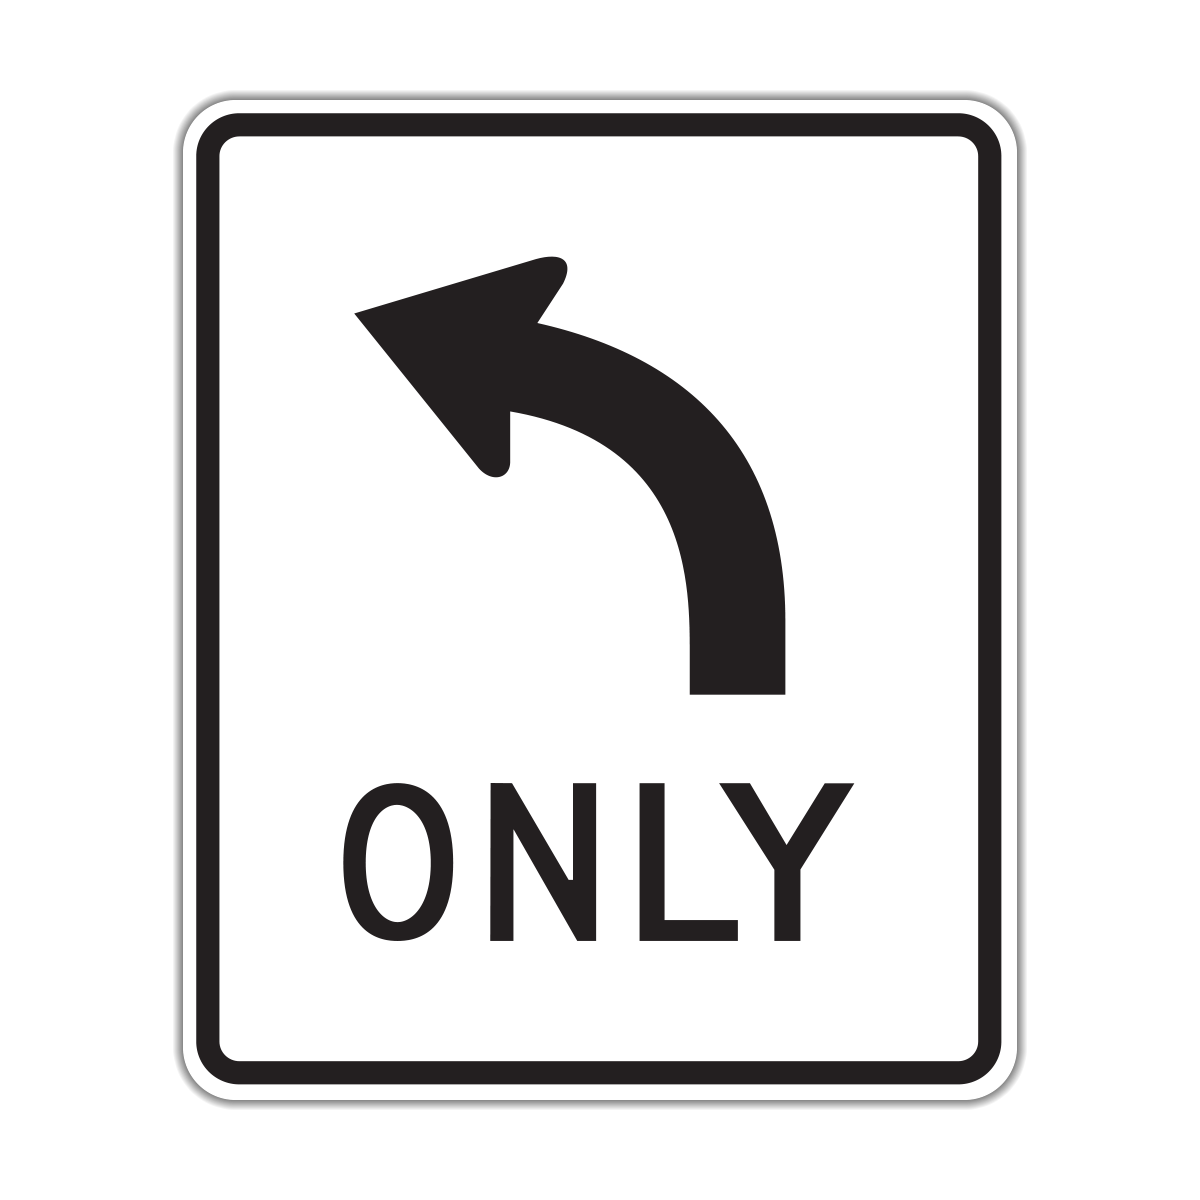 R3-5 (Left or Right) Turn Only